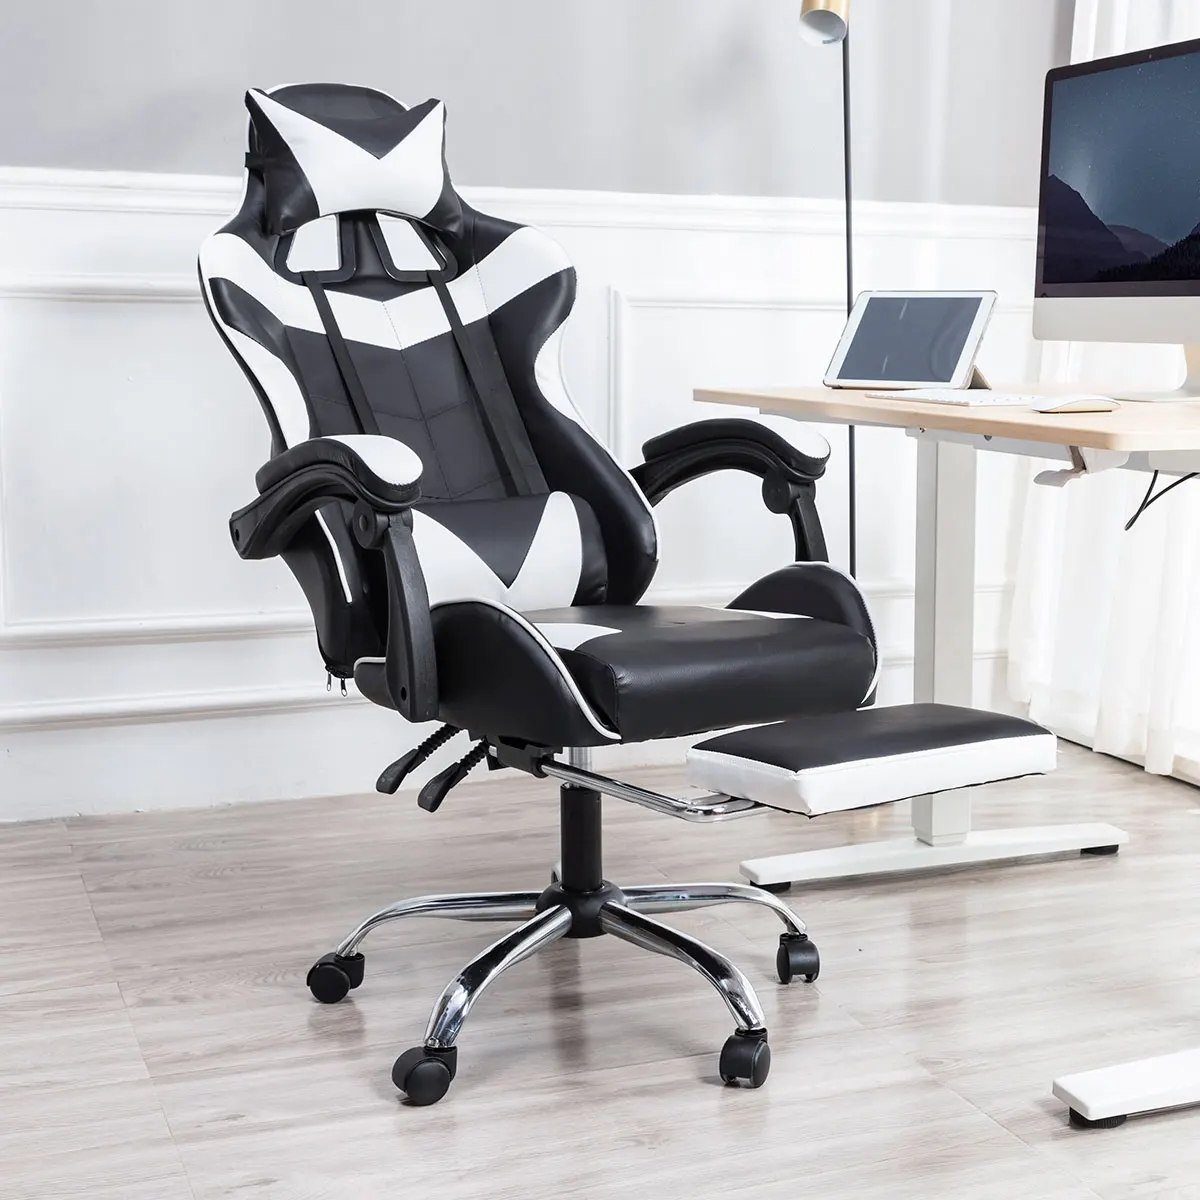 Reclining Office Chair Adjustable Height Rotating Lift Chair